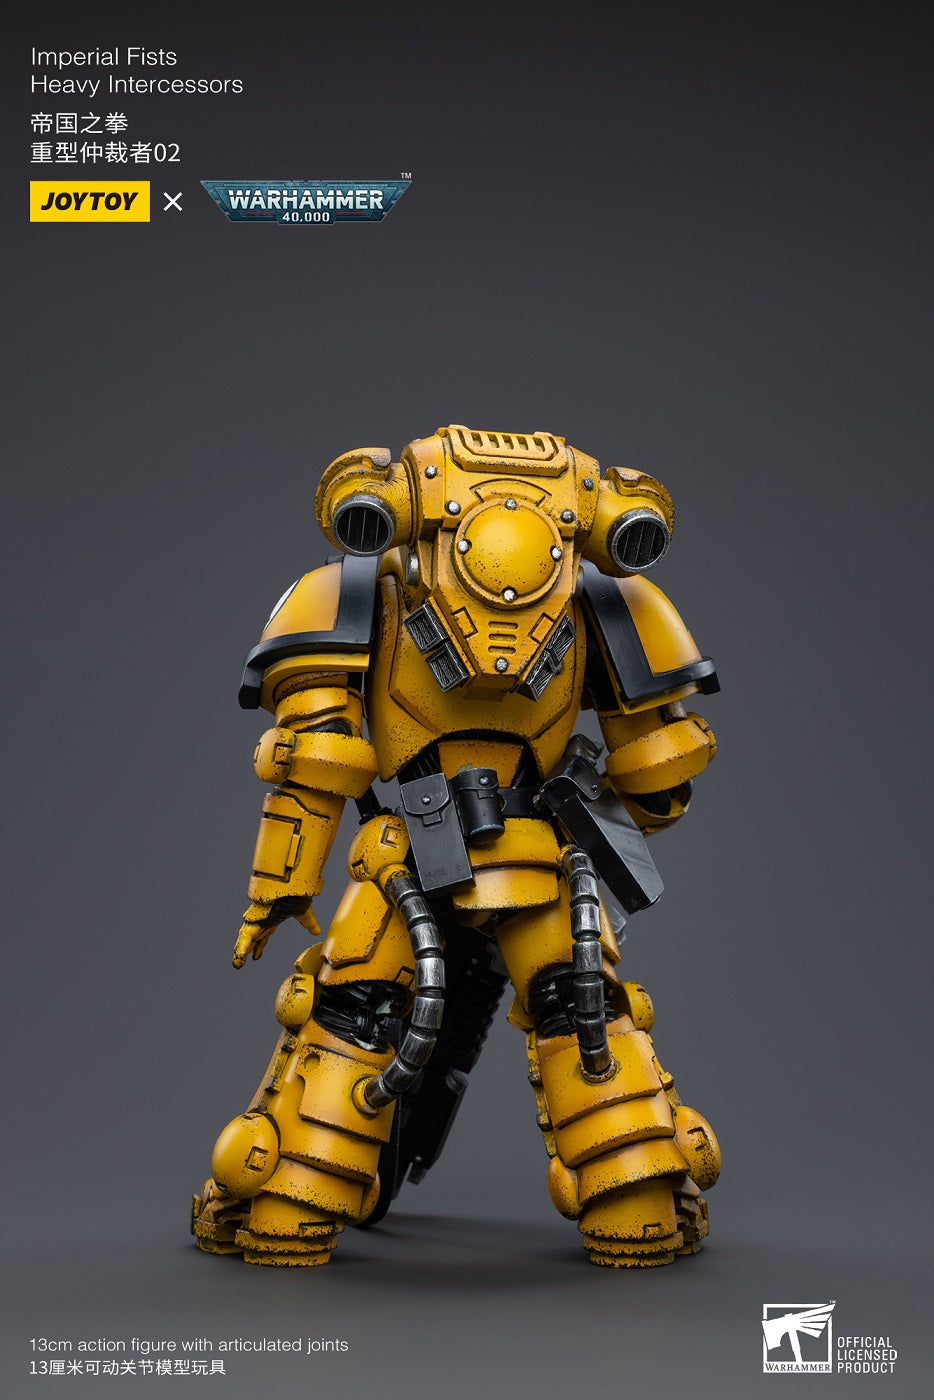 Imperial Fists Heavy Intercessors 02 - Warhammer 40K Action Figure By JOYTOY